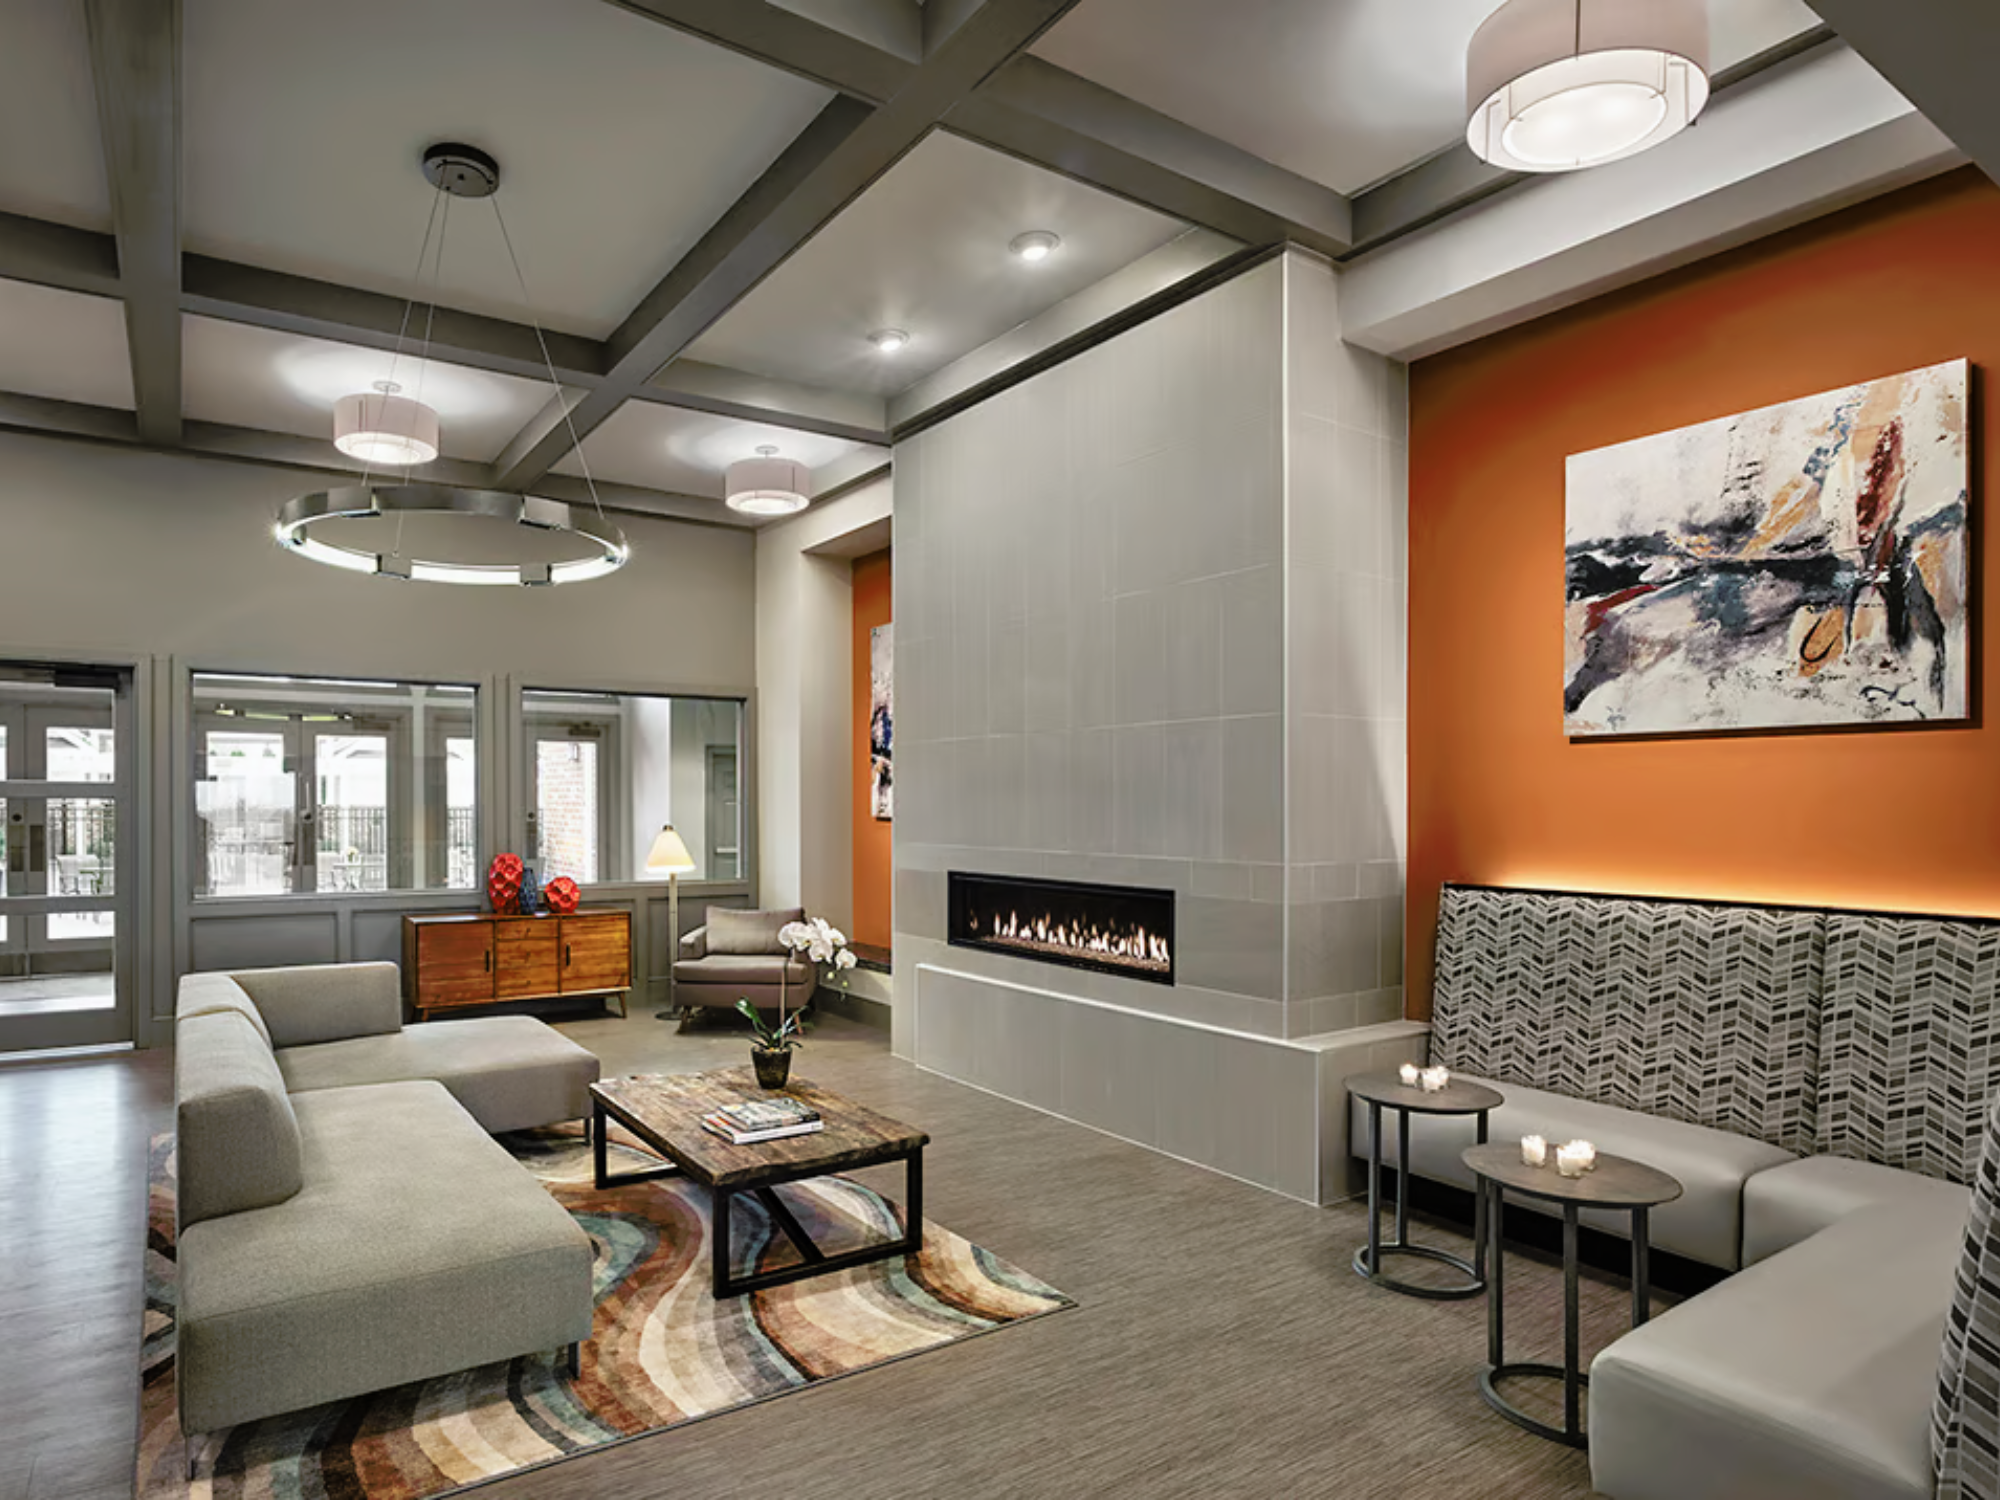 AVE DOWNINGTOWN ANNOUNCES AMENITY SPACE RENOVATION